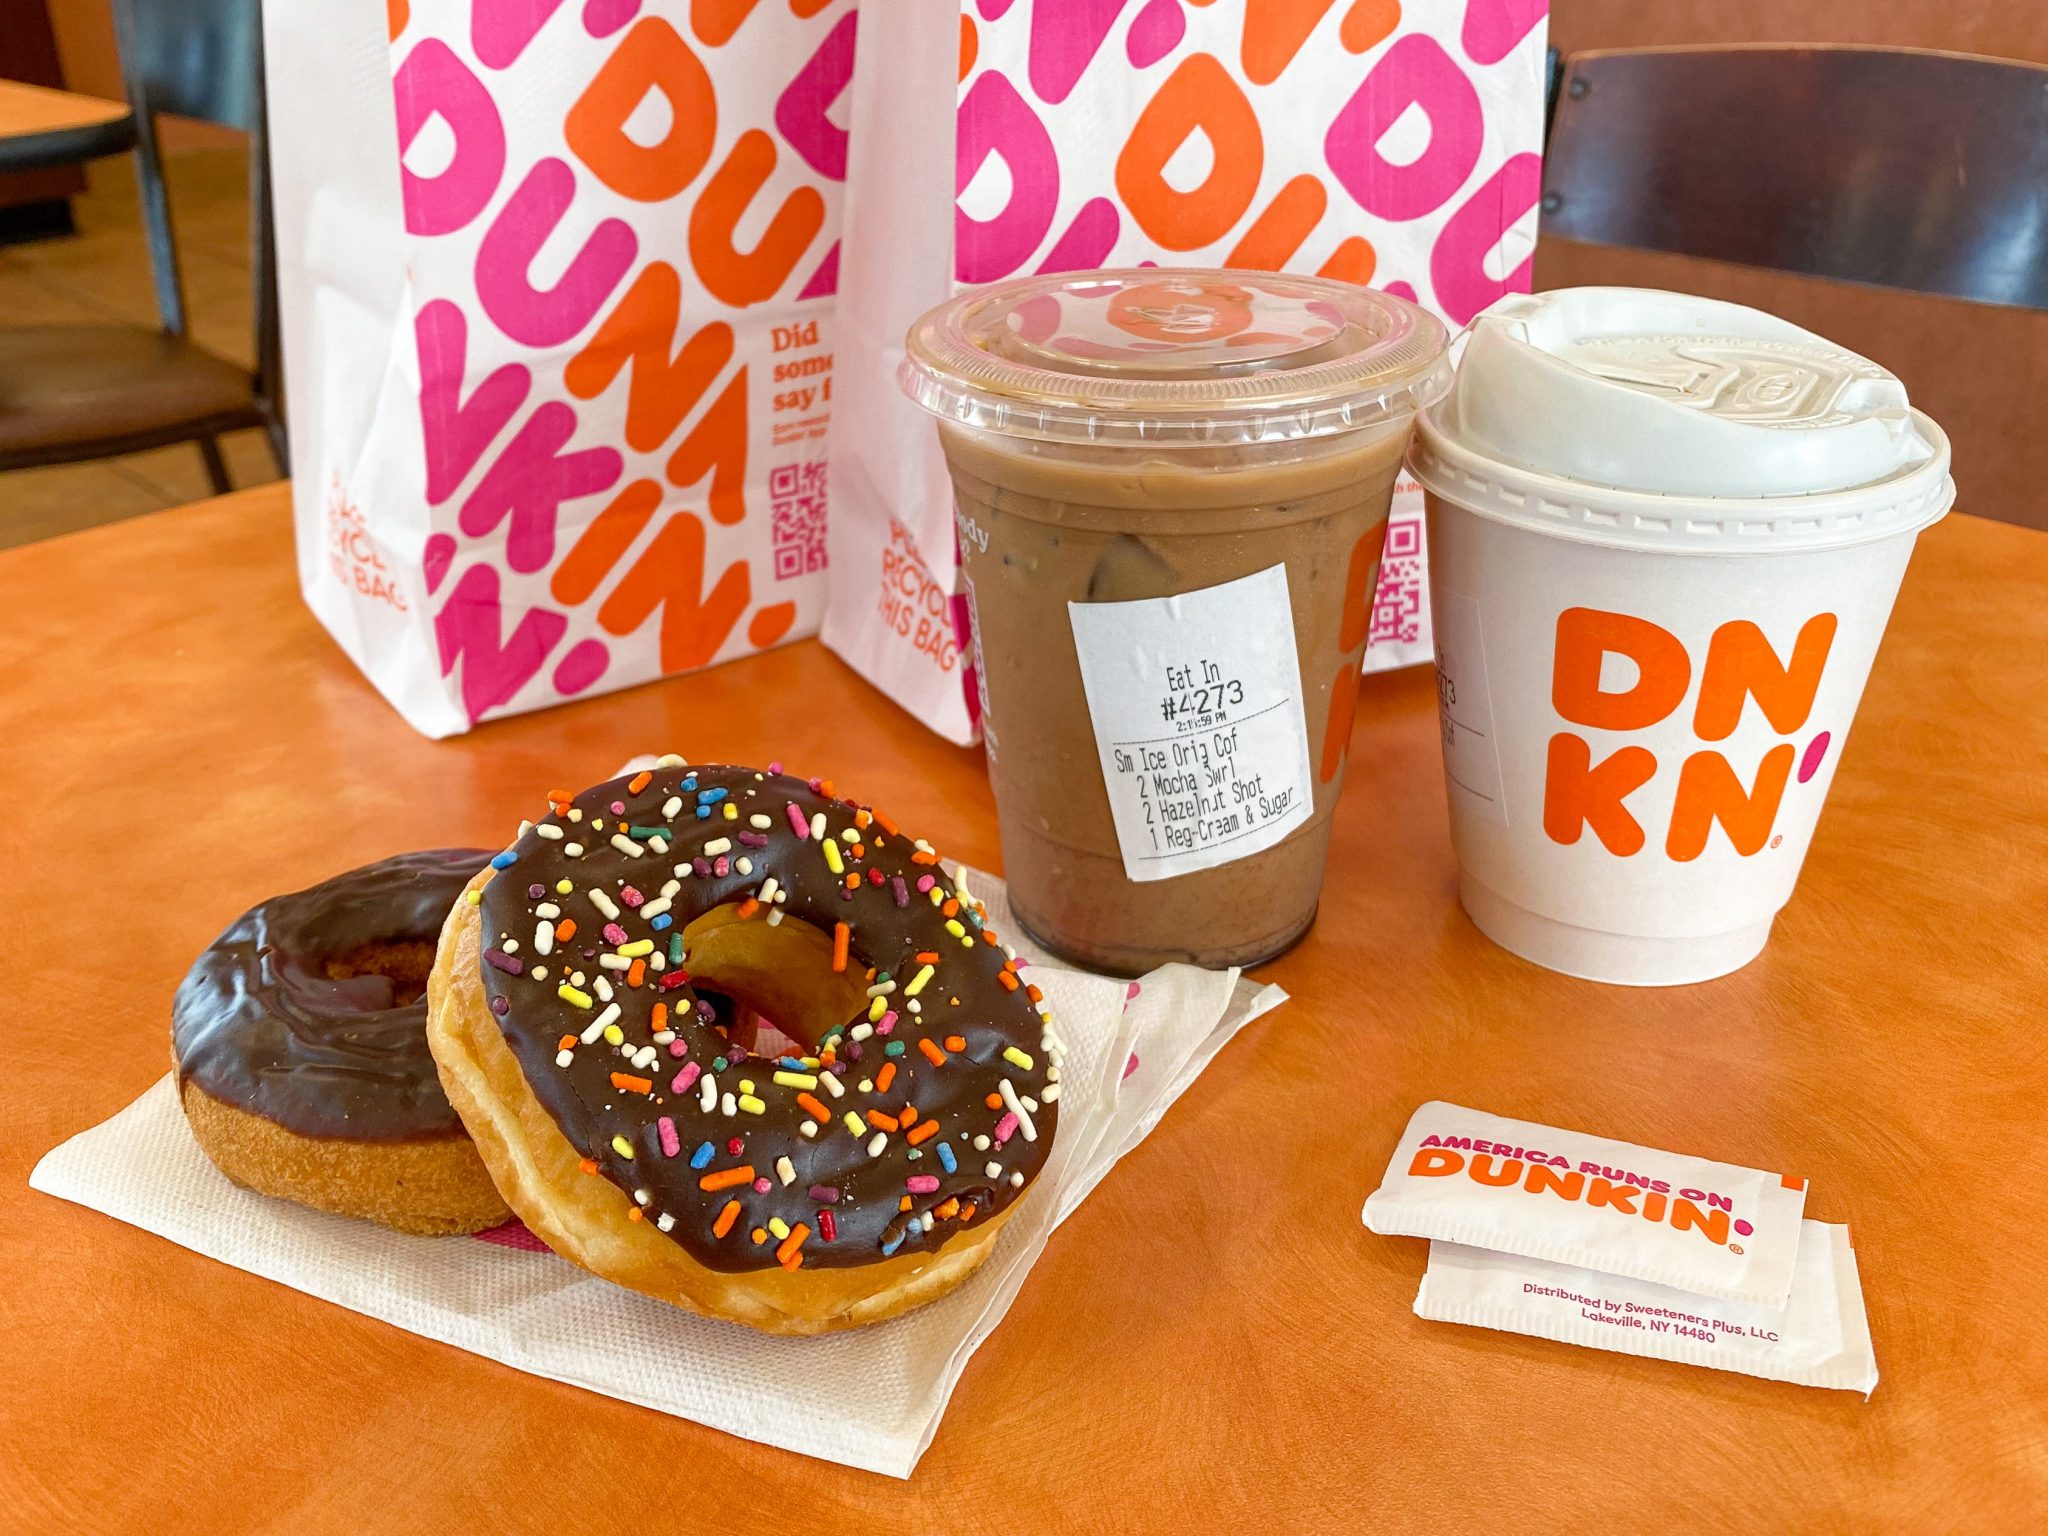 How to Add Dunkin Donuts Points From Receipt? Healing Picks